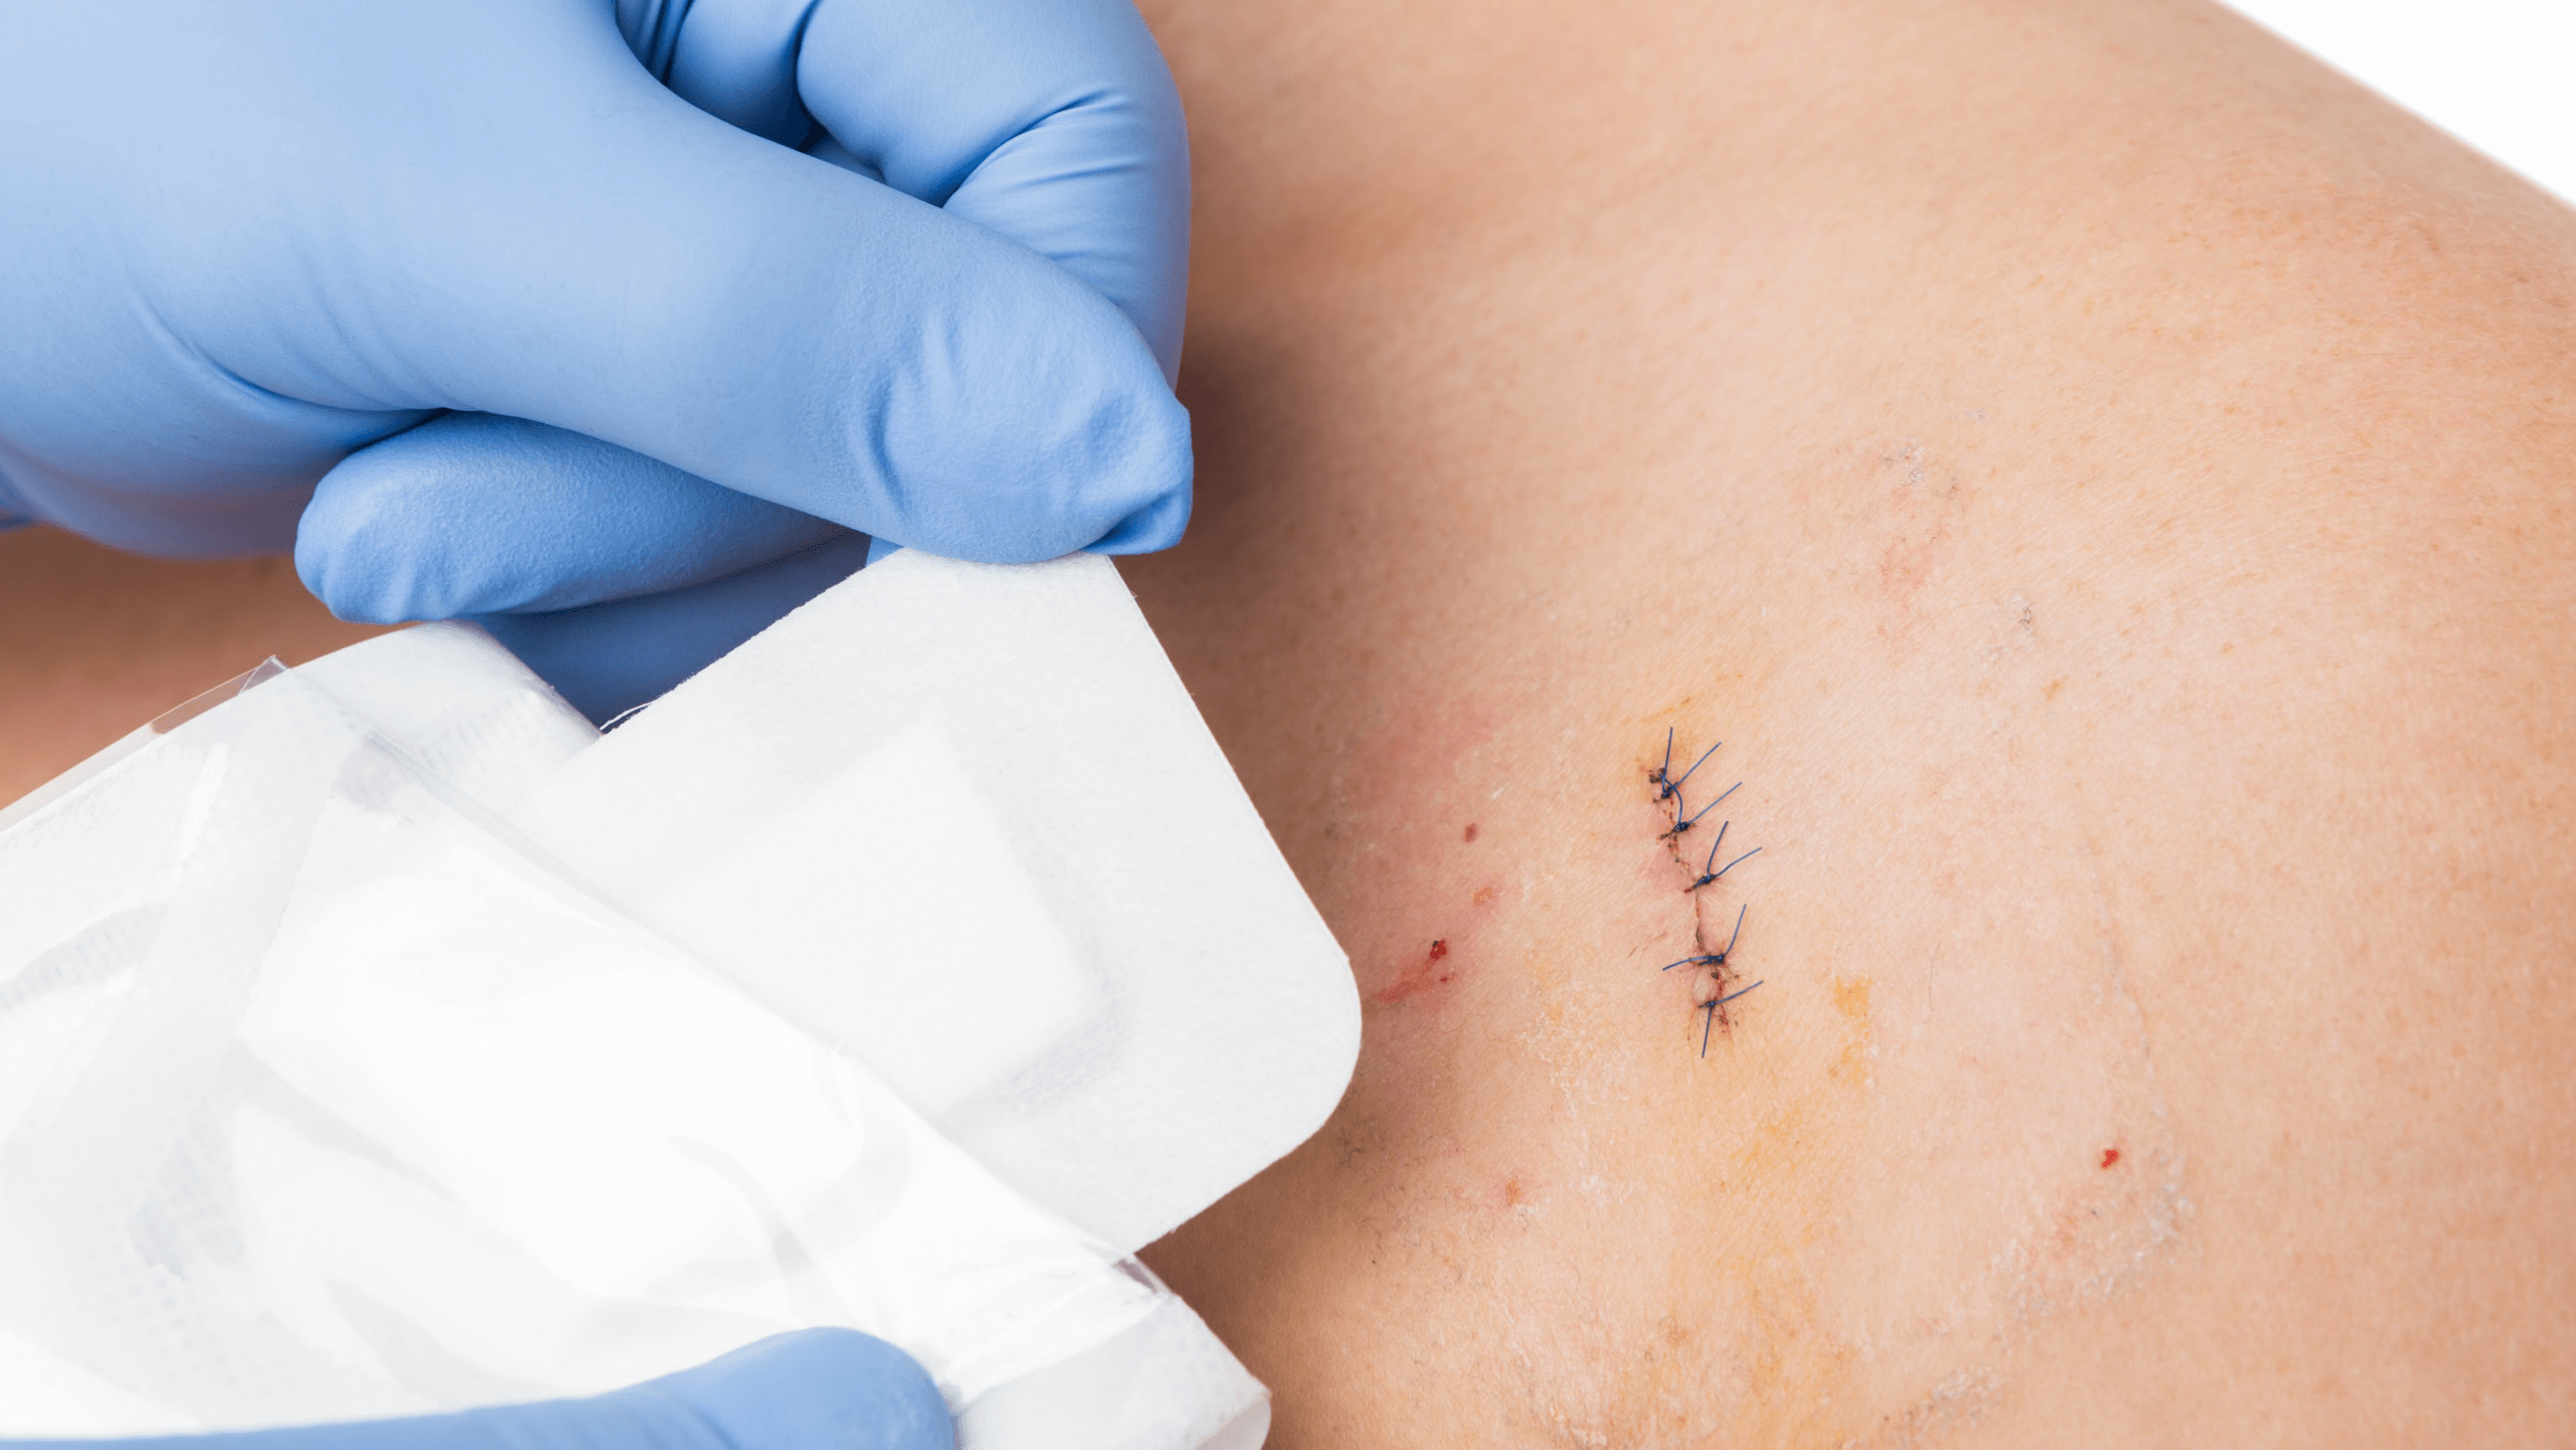 How to Know if a Cut Needs Stitches or Not - University Urgent Care